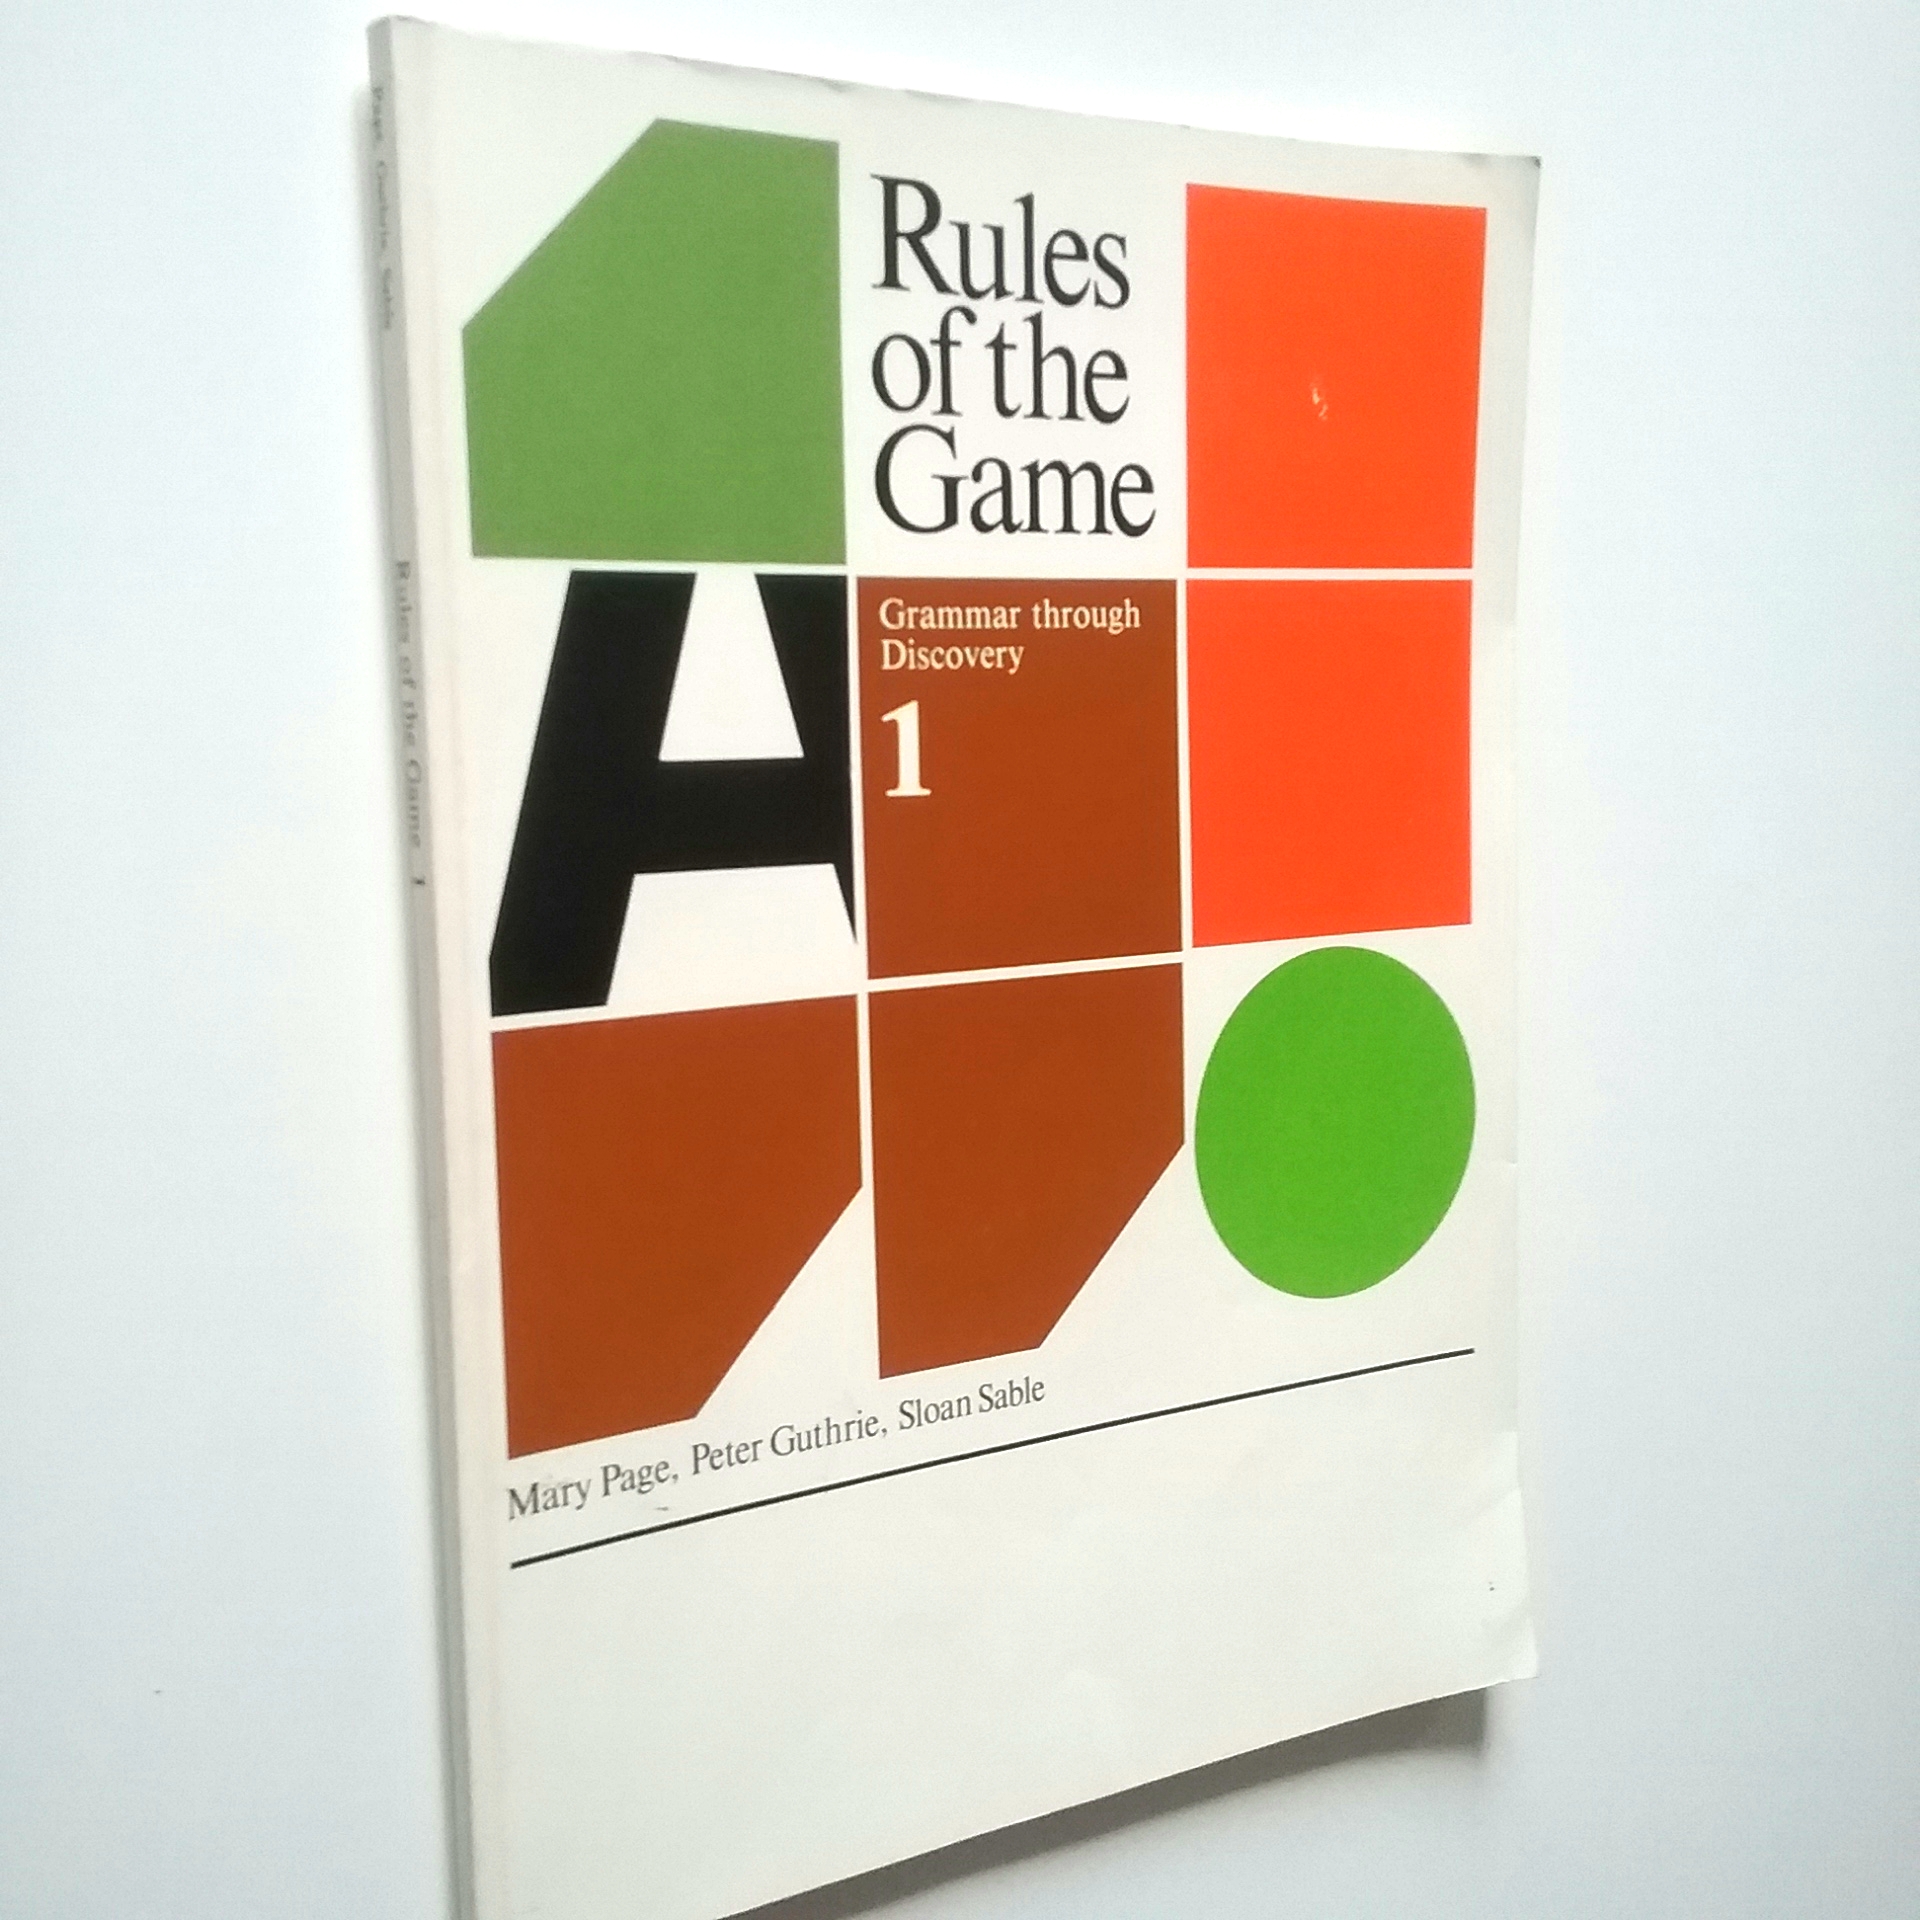 Rules of the Game. Grammar through Discovery 1 - Mary Page, Peter Guthrie, Sloan Sable